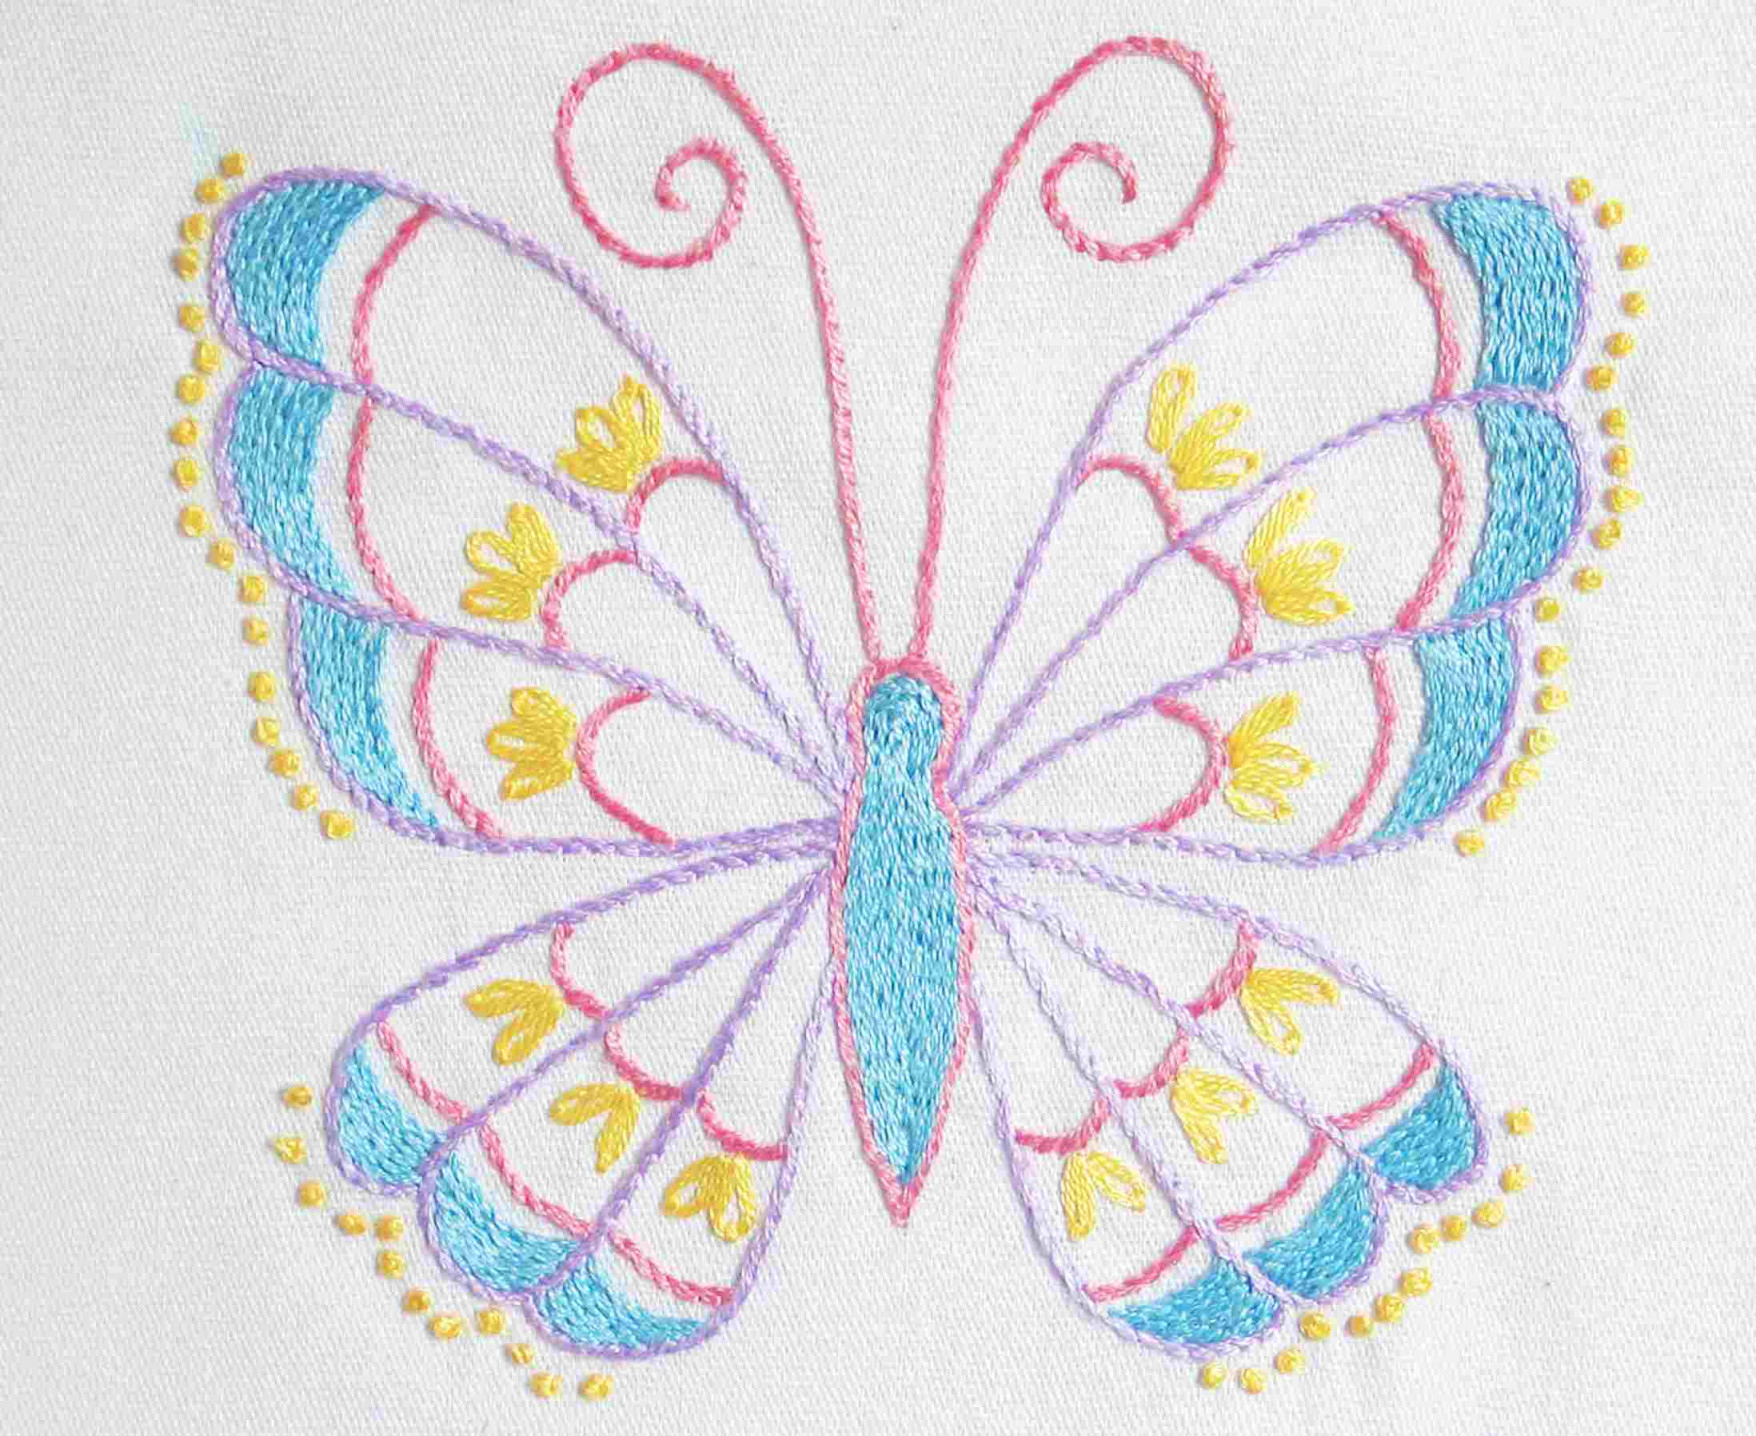 Embroidery Patterns Free Flower Border Embroidery Patterns Elegant 10 Free Embroidery